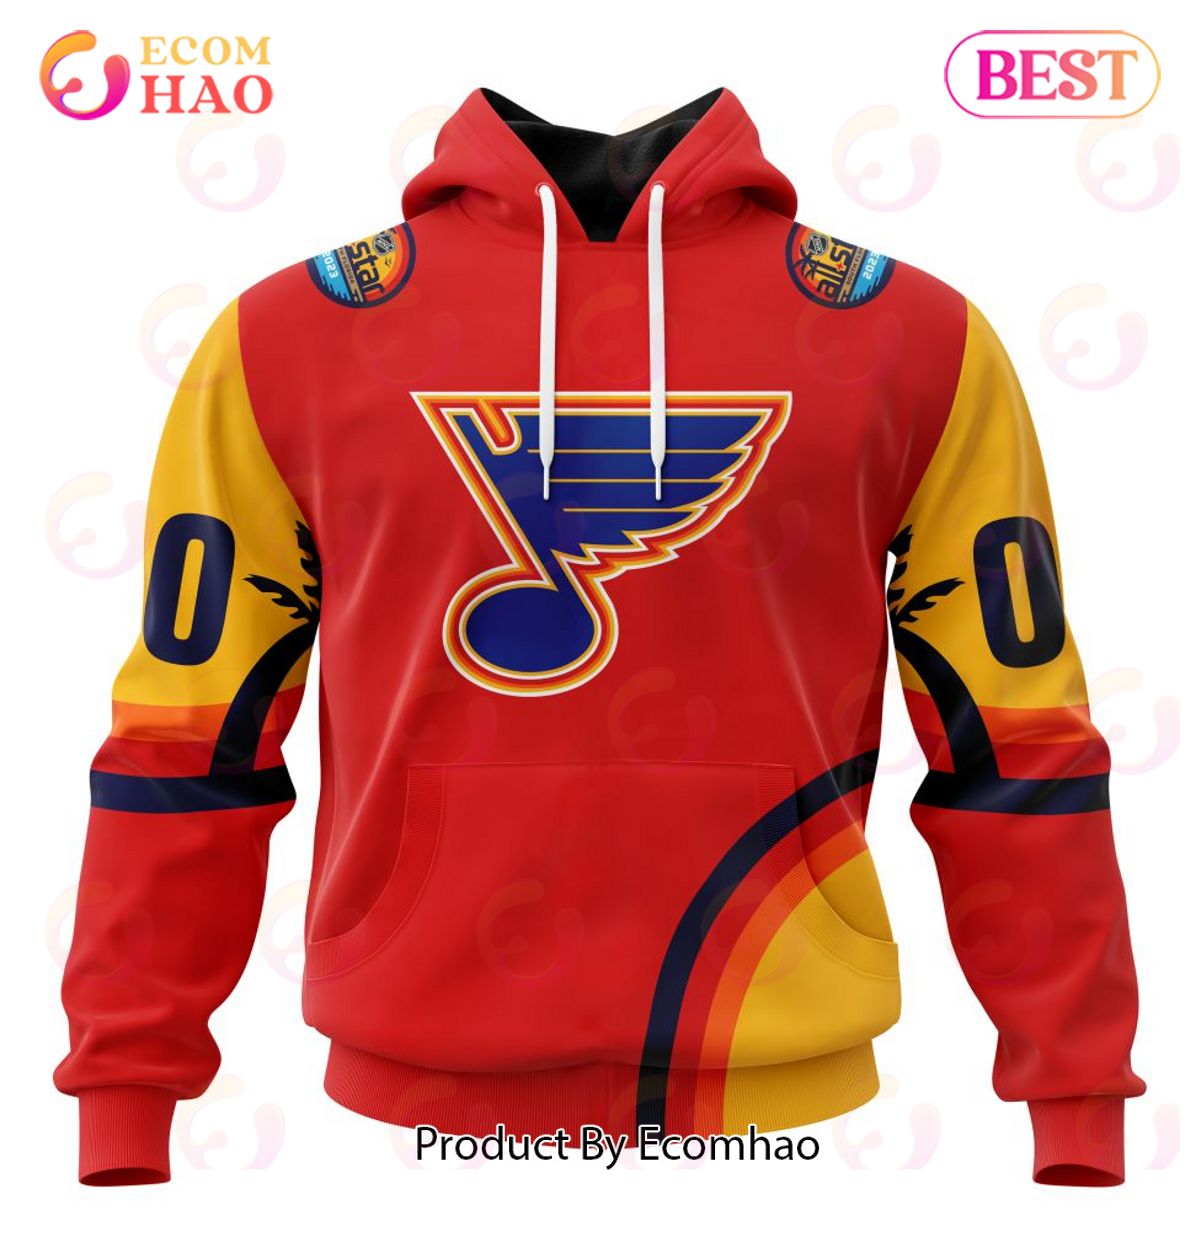 NHL St. Louis Blues Special ALL Star Game Design With Florida Sunset 3D Hoodie